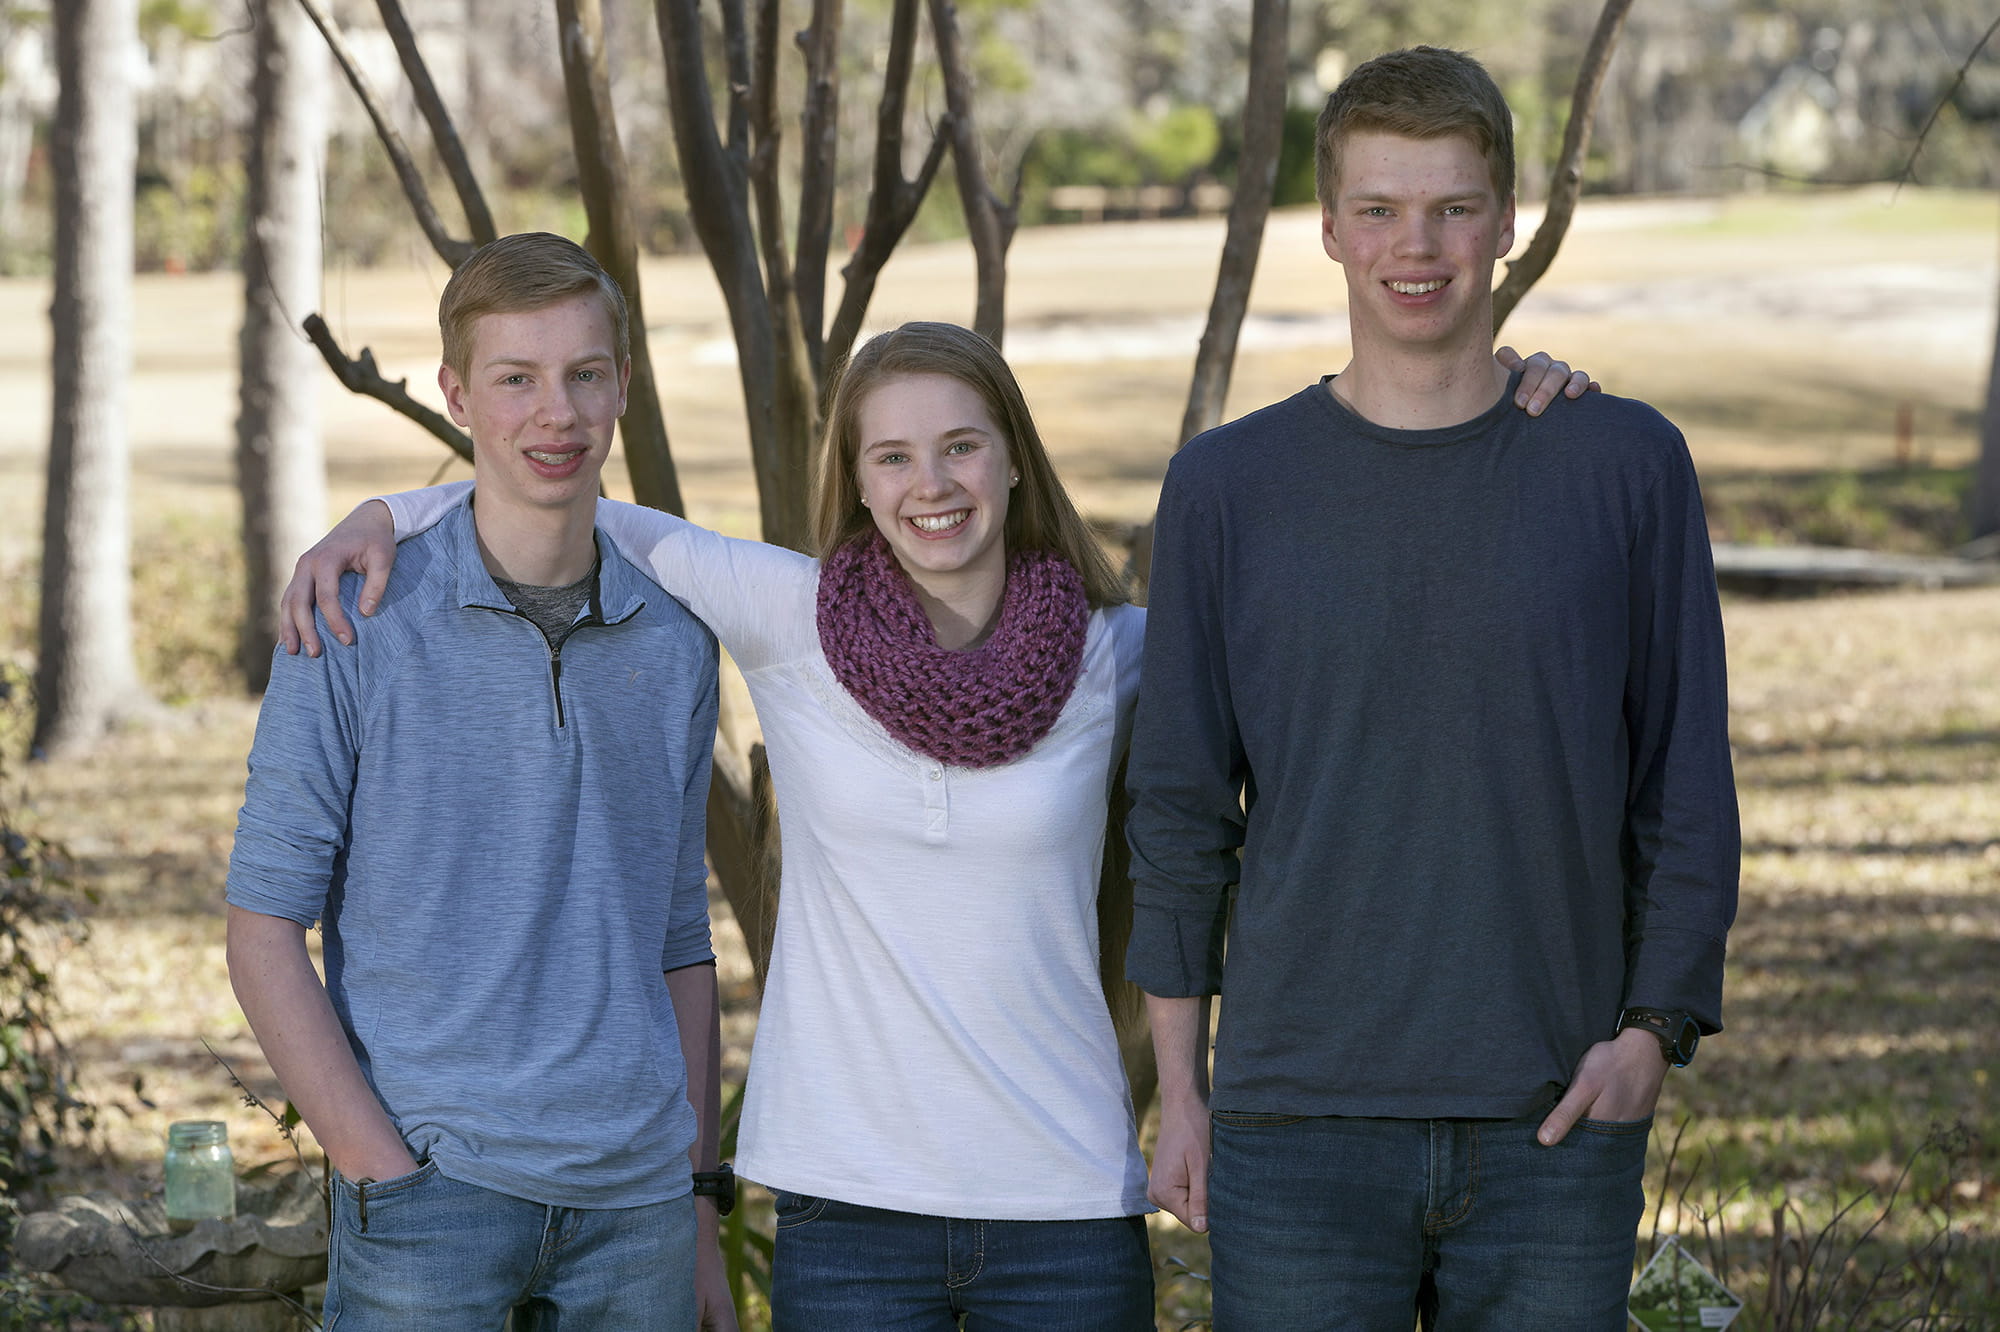 16-year-old triplets stand for photo in their back yard